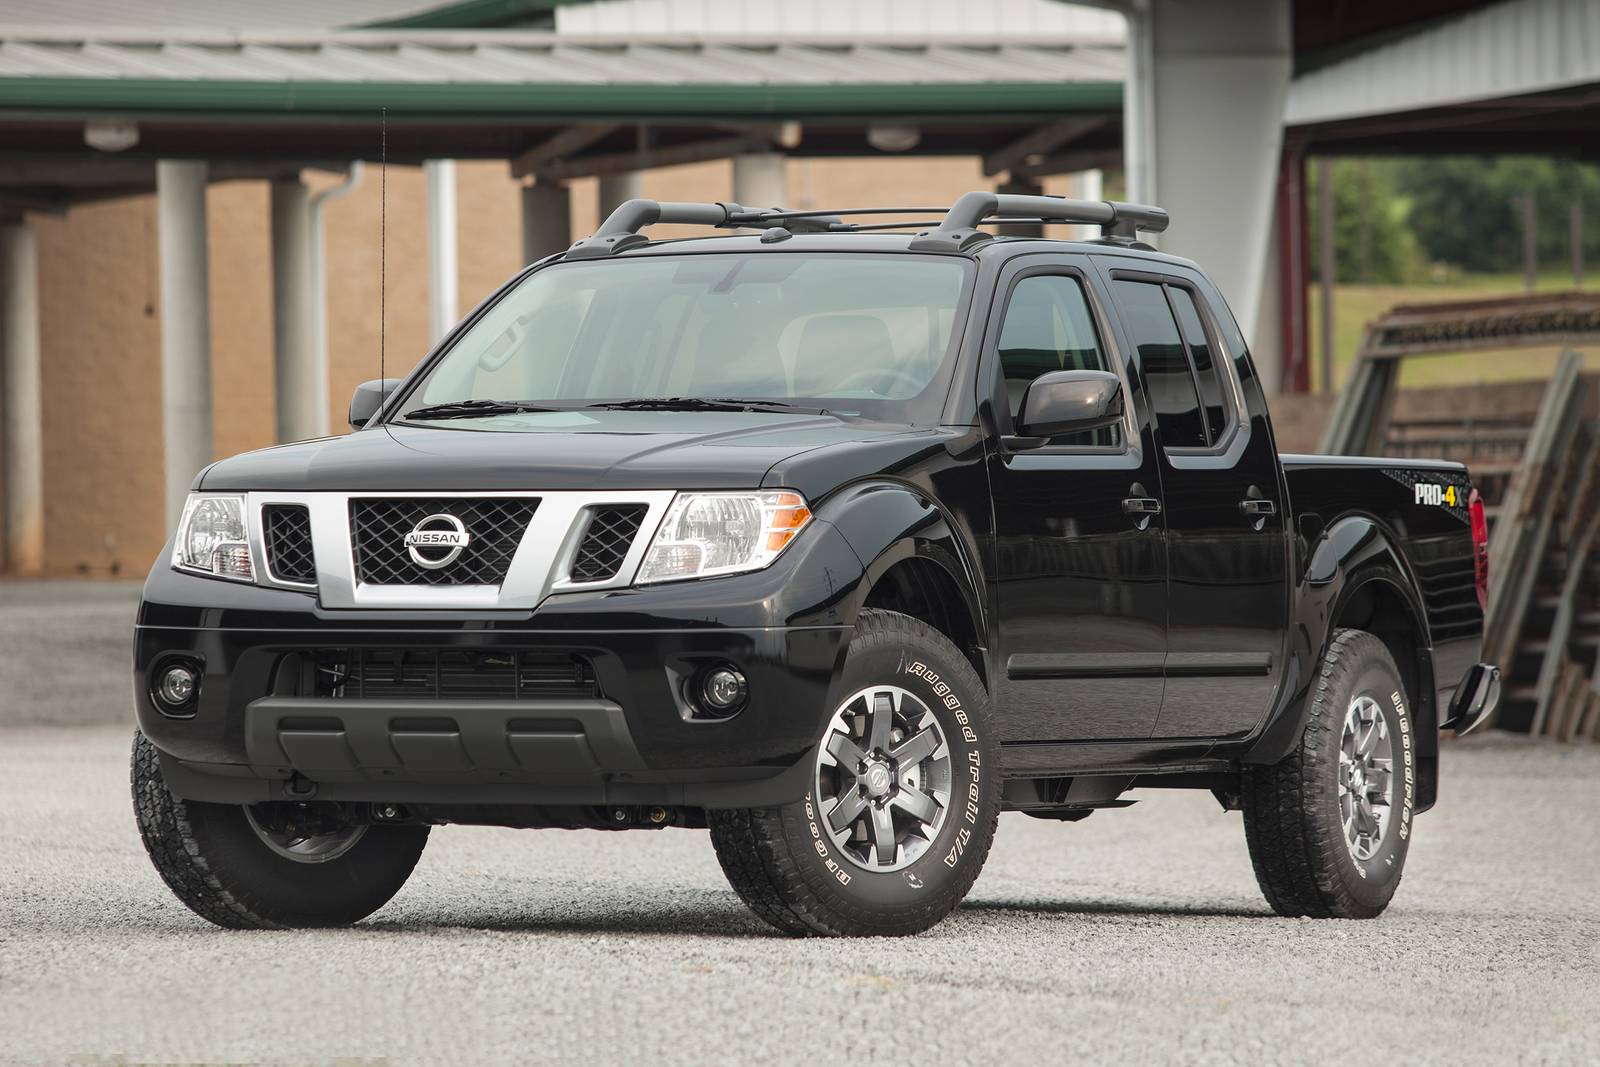 NISSAN FRONTIER 4X4 2.5 CD AC TDI DUAL AIRBAGS+ABS ▶ Impuesto Vehicular ≫ 2021